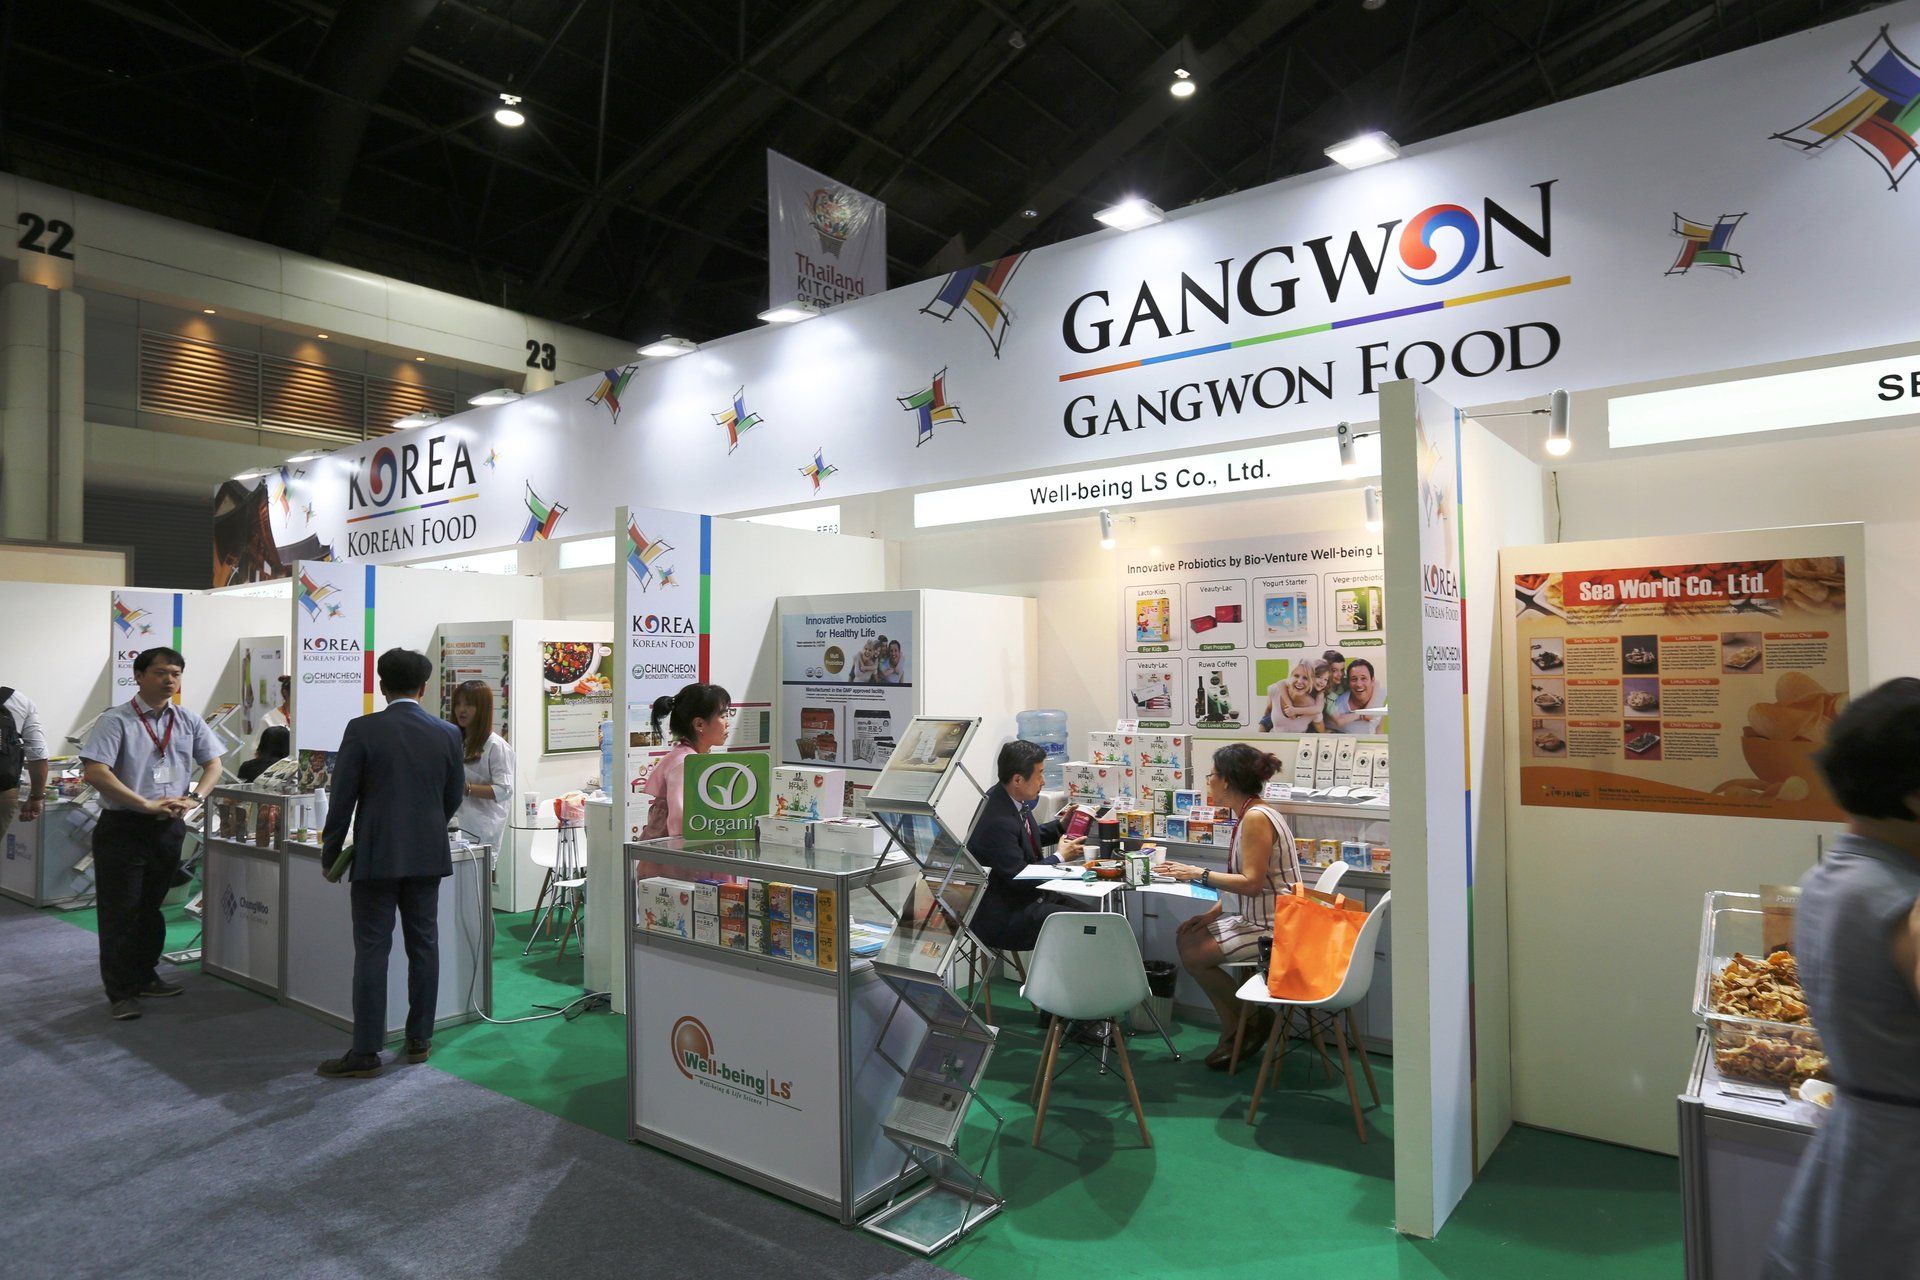 Korea Pavilion @ Thaifex 2015. Booth designed and built by Essential Global Fairs.